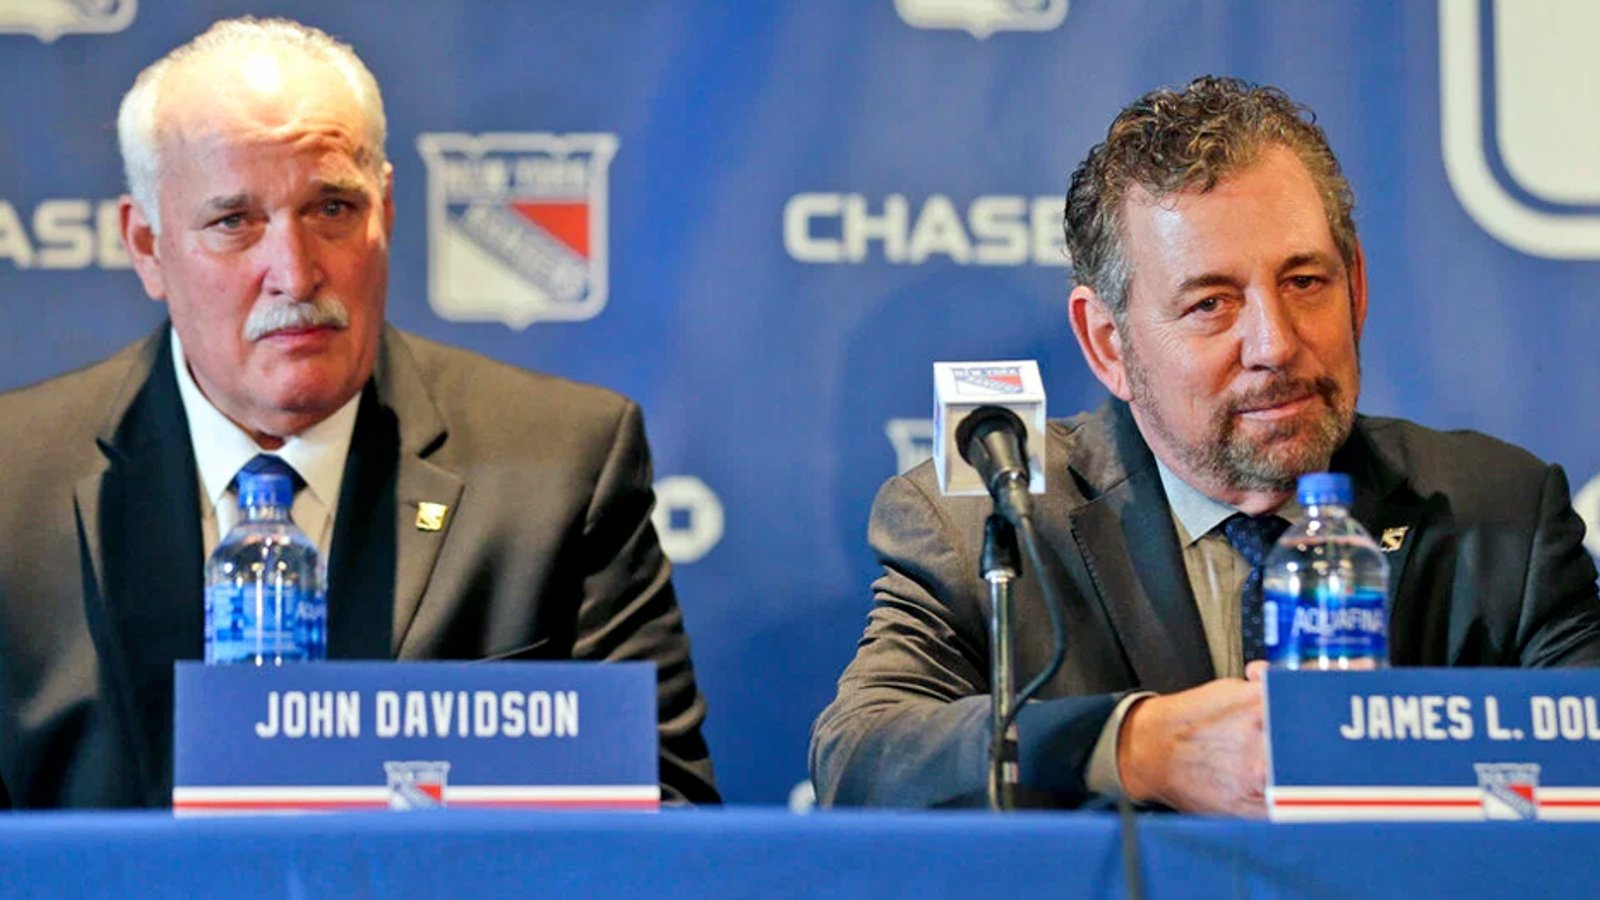 Report: Inside details of today's surprising moves by Rangers owner James Dolan